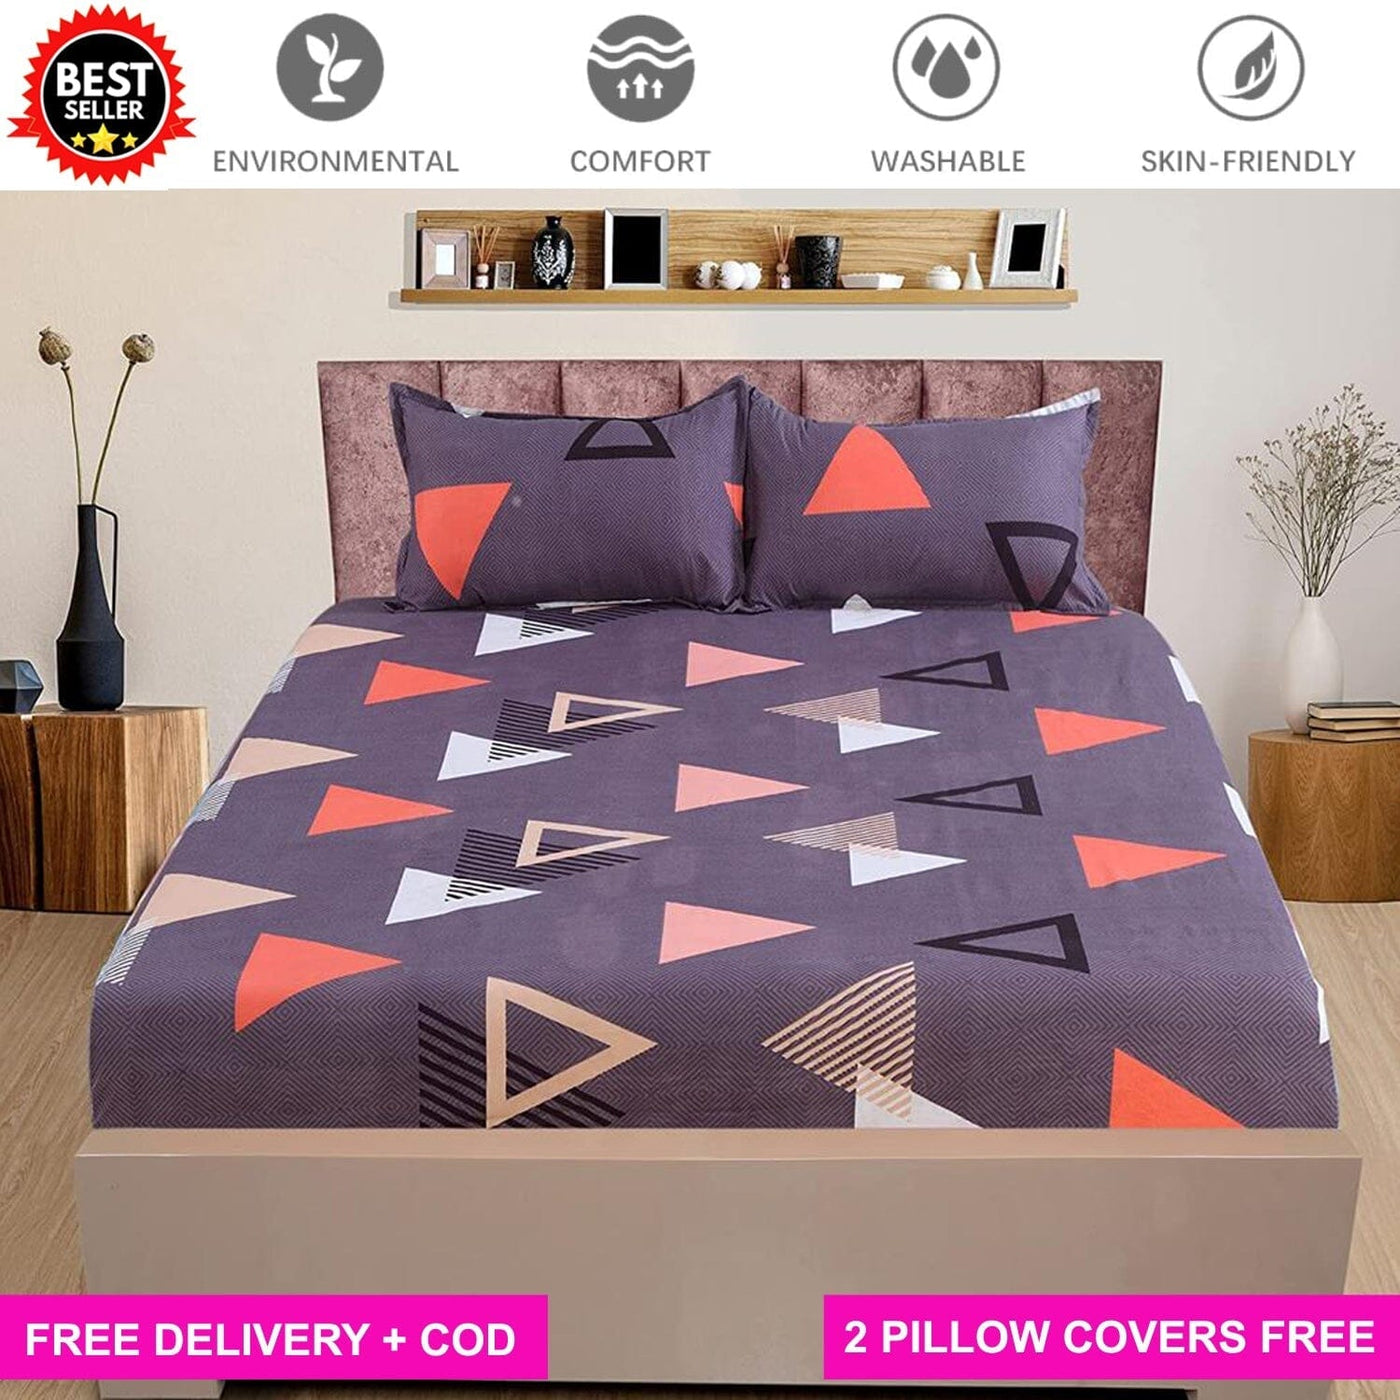 Grey Triangle Full Elastic Fitted Bedsheet with 2 Pillow Covers Bed Sheets Great Happy IN KING SIZE - ₹1299 